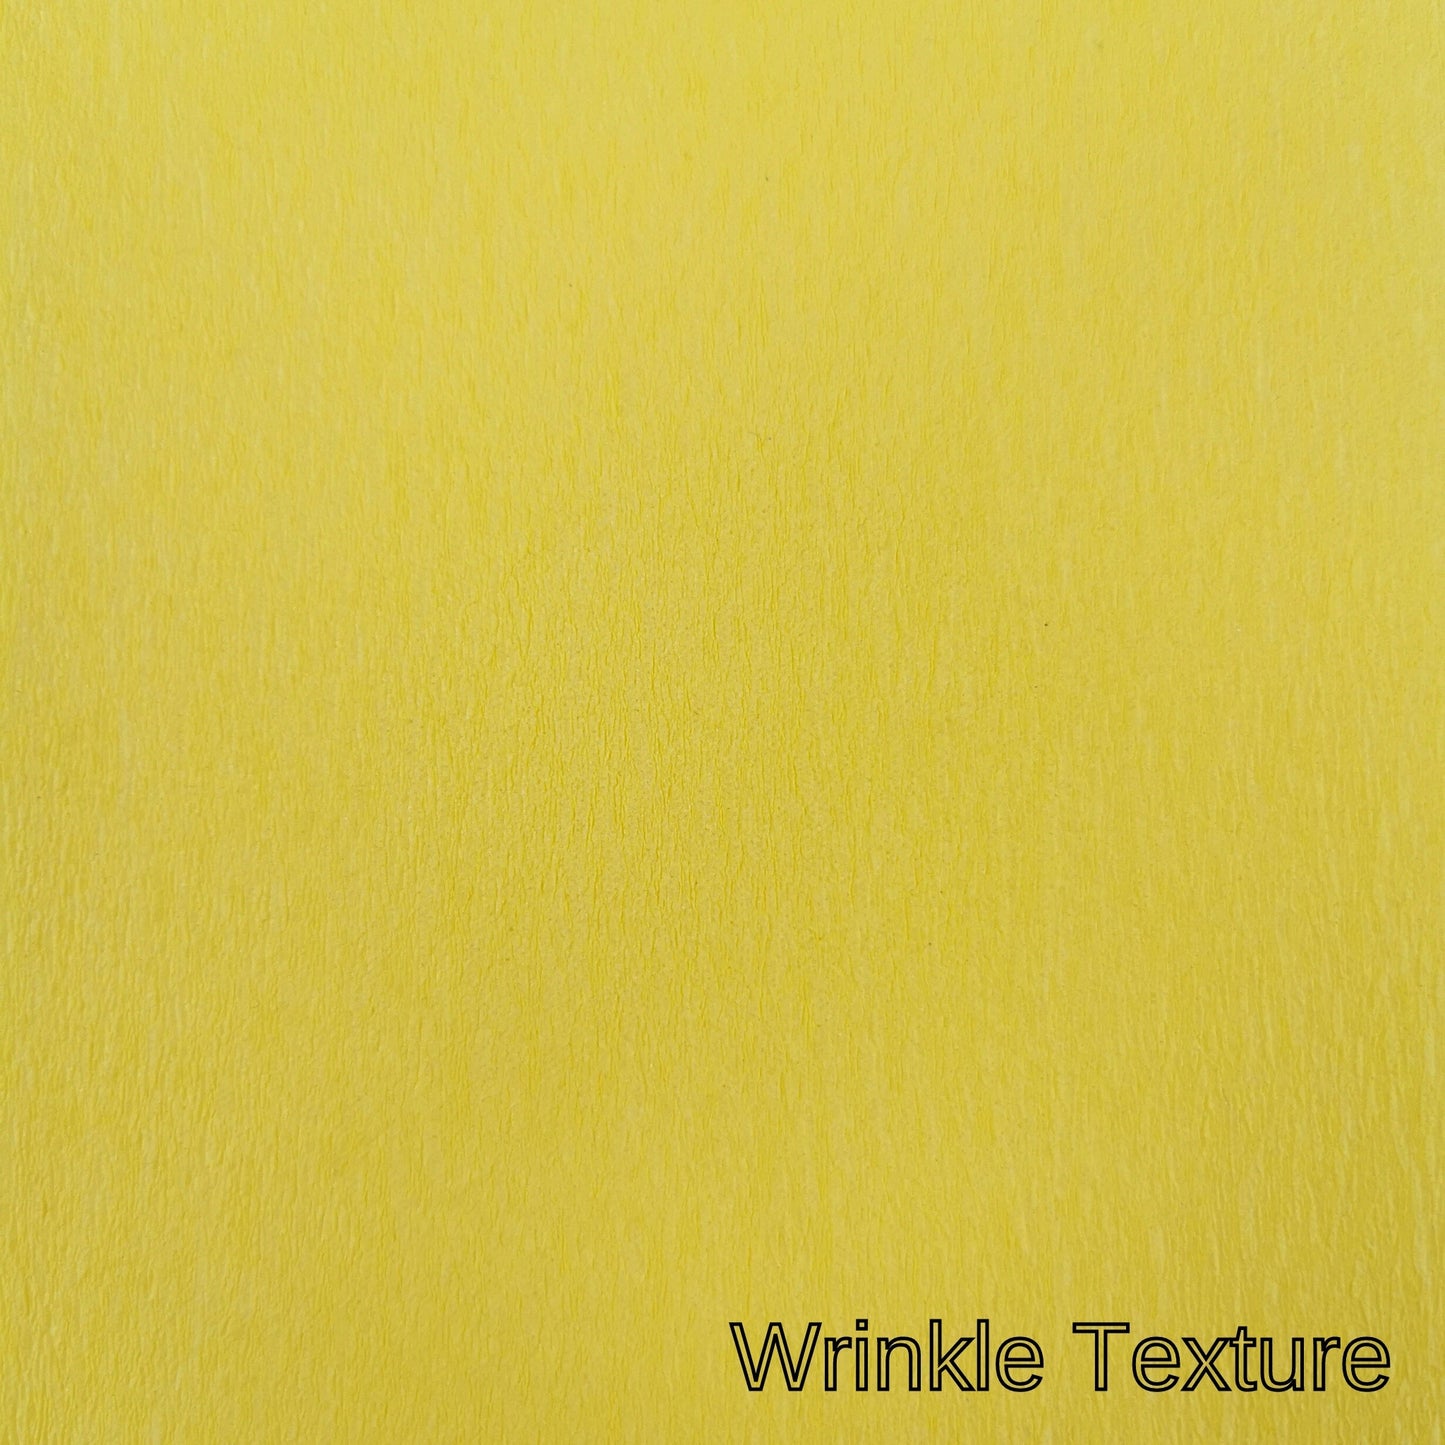 Crepe paper 3m 65% Stretch Yellow